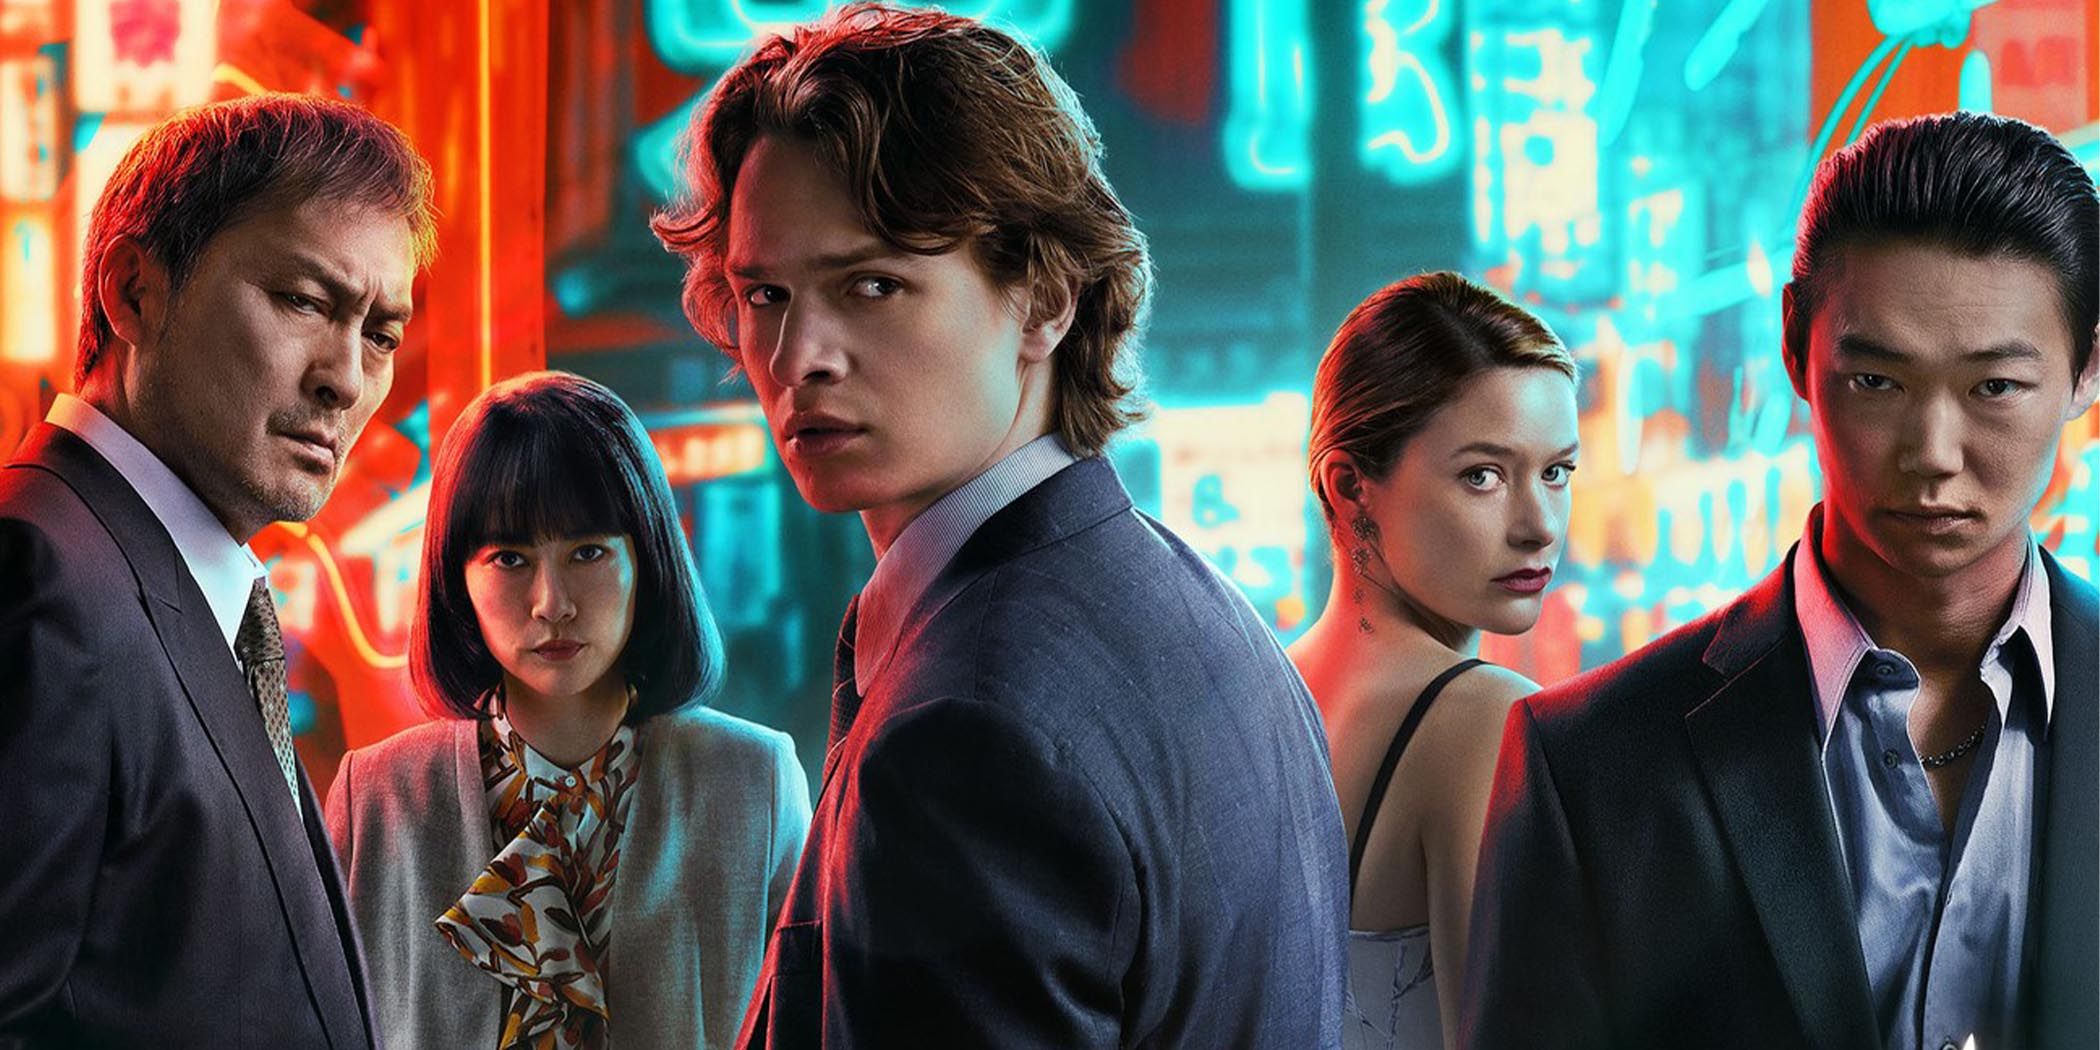 Image of the main characters of Tokyo Vice from the key poster art